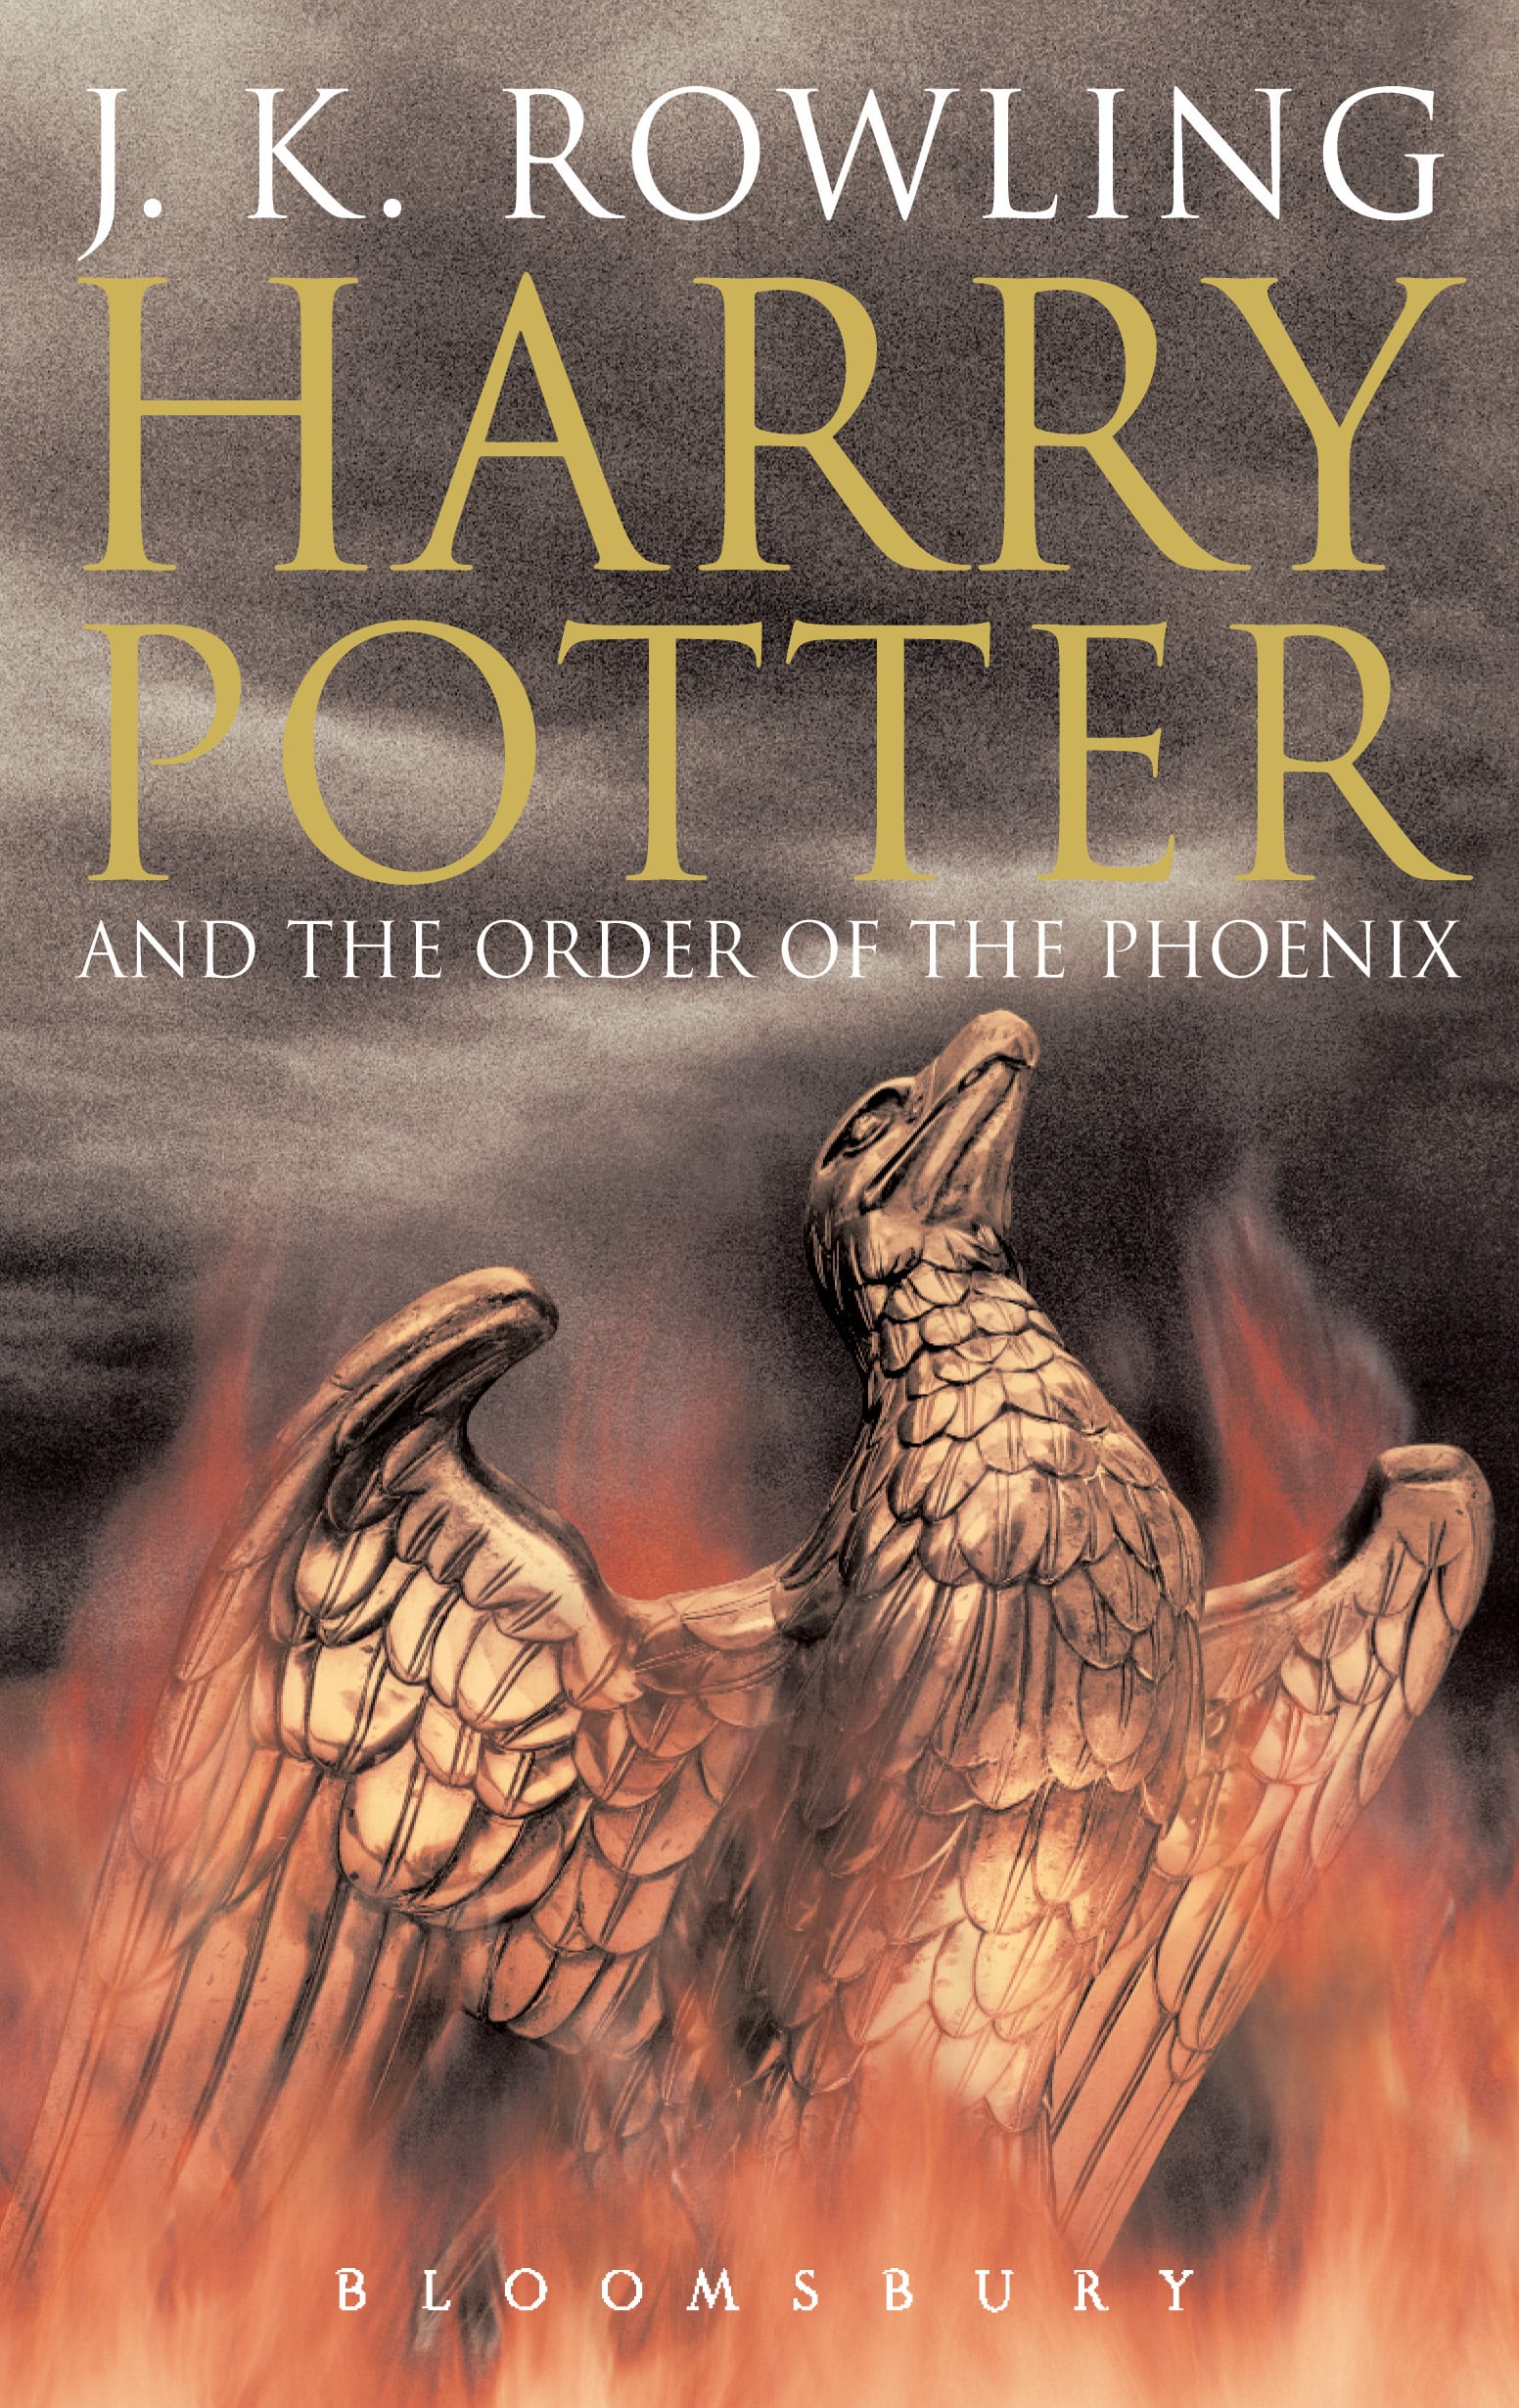 harry potter and the order of the phoenix pdf